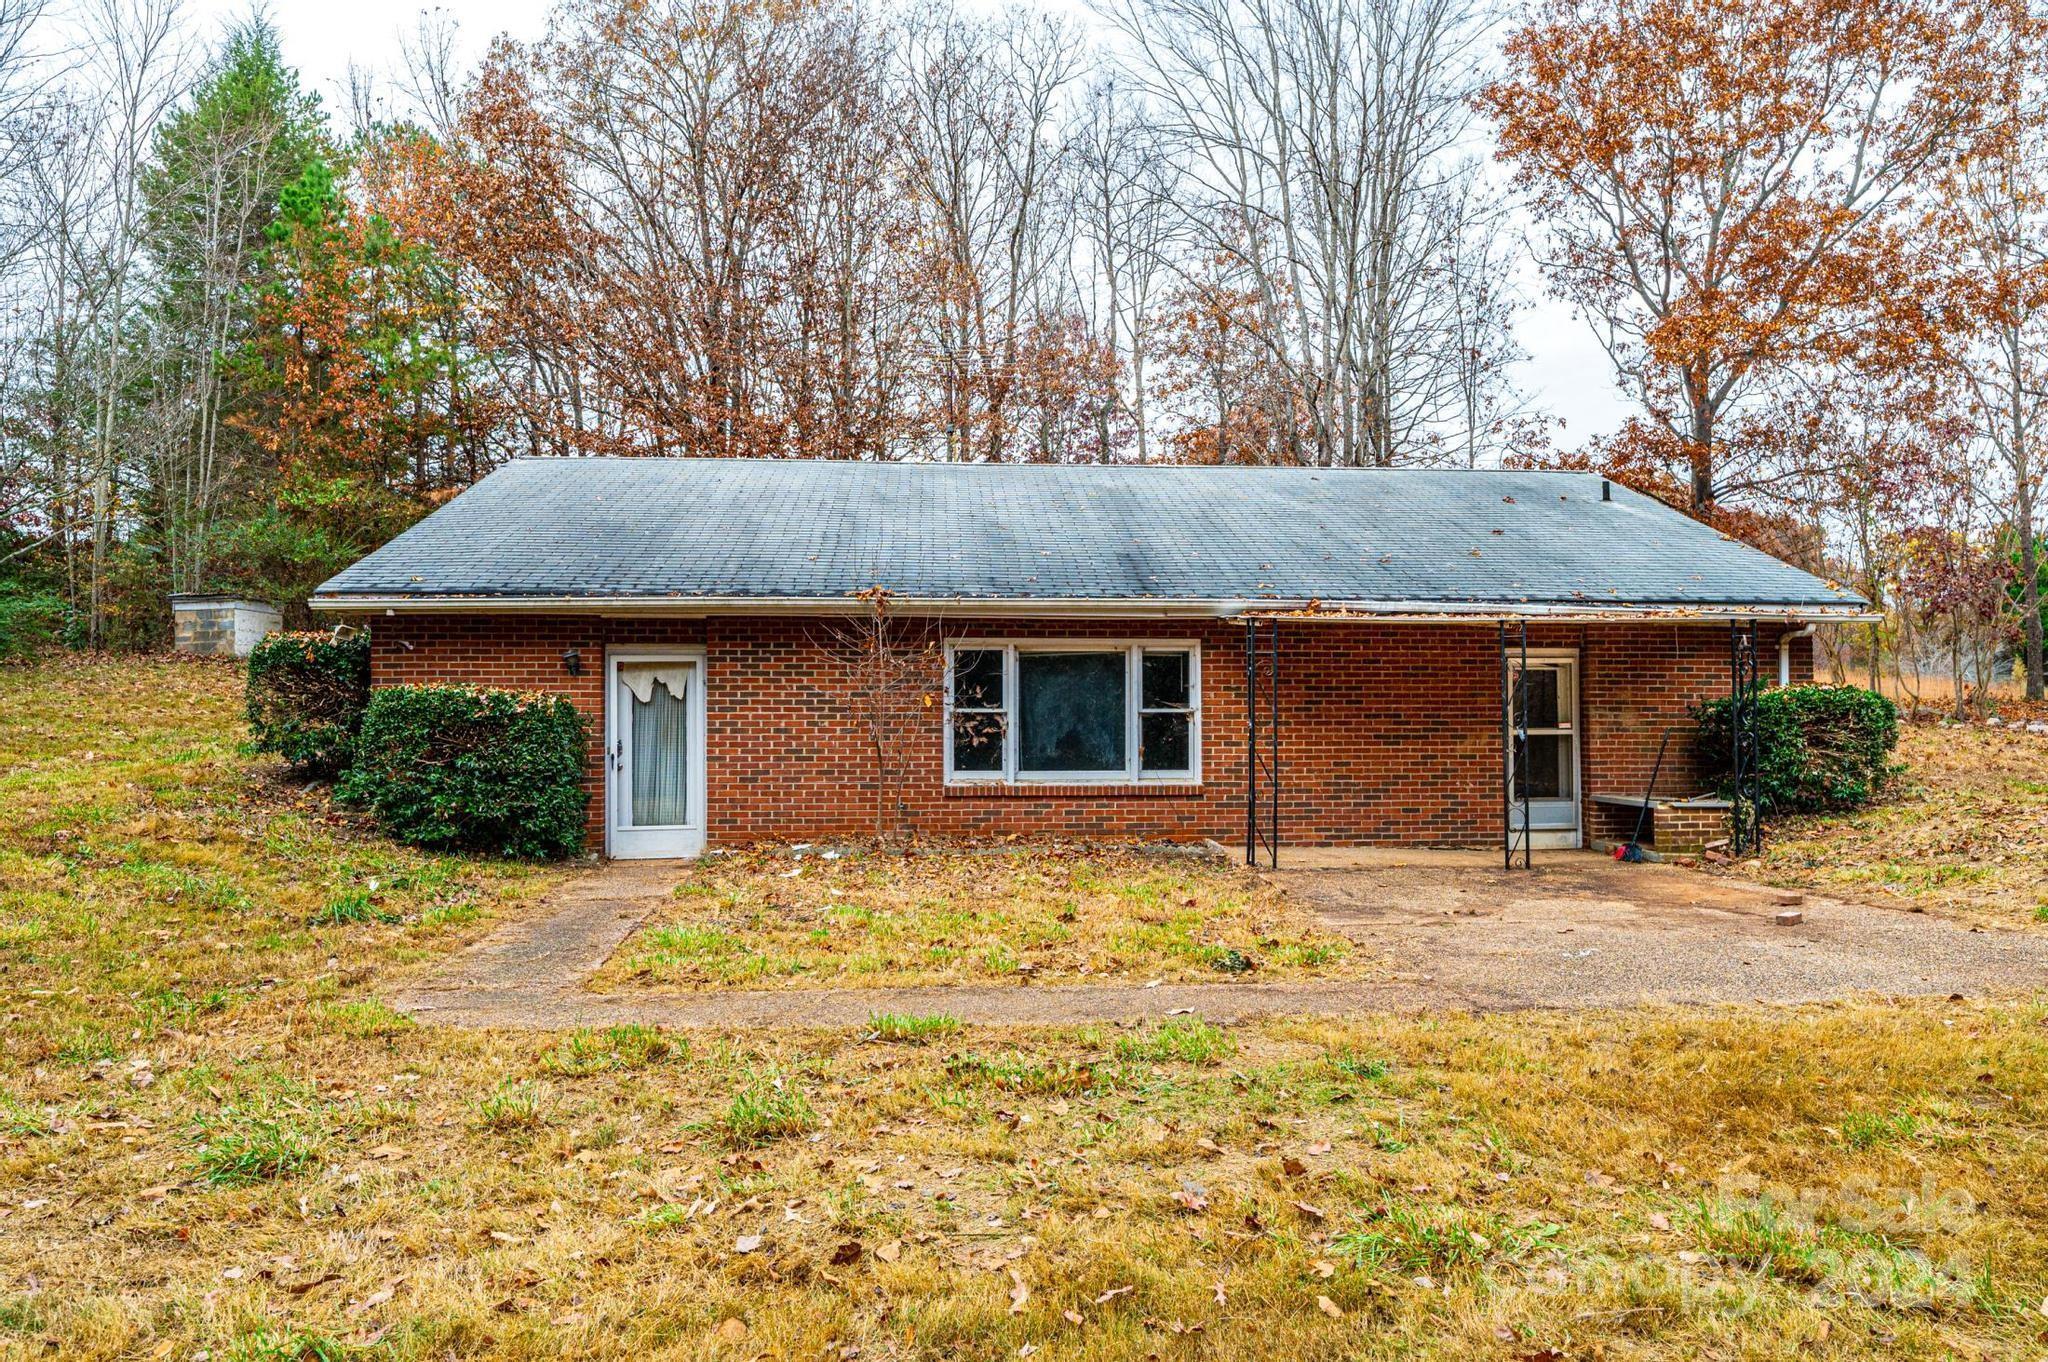 Photo one of 5410 Carver House Rd Conover NC 28613 | MLS 4111686